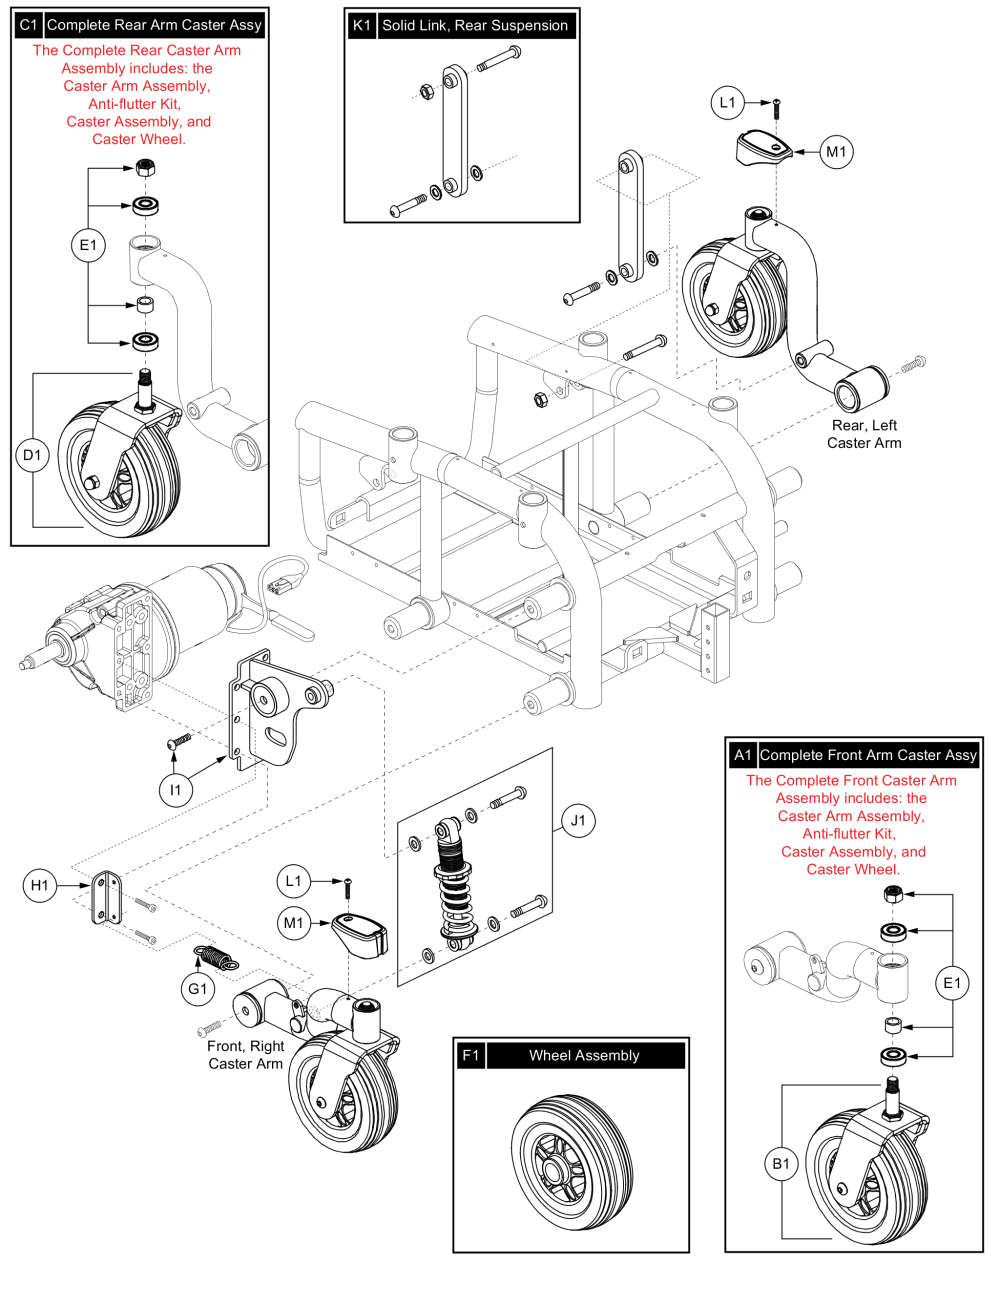 Caster Assy - Right Front, Left Rear, Jazzy 614 parts diagram